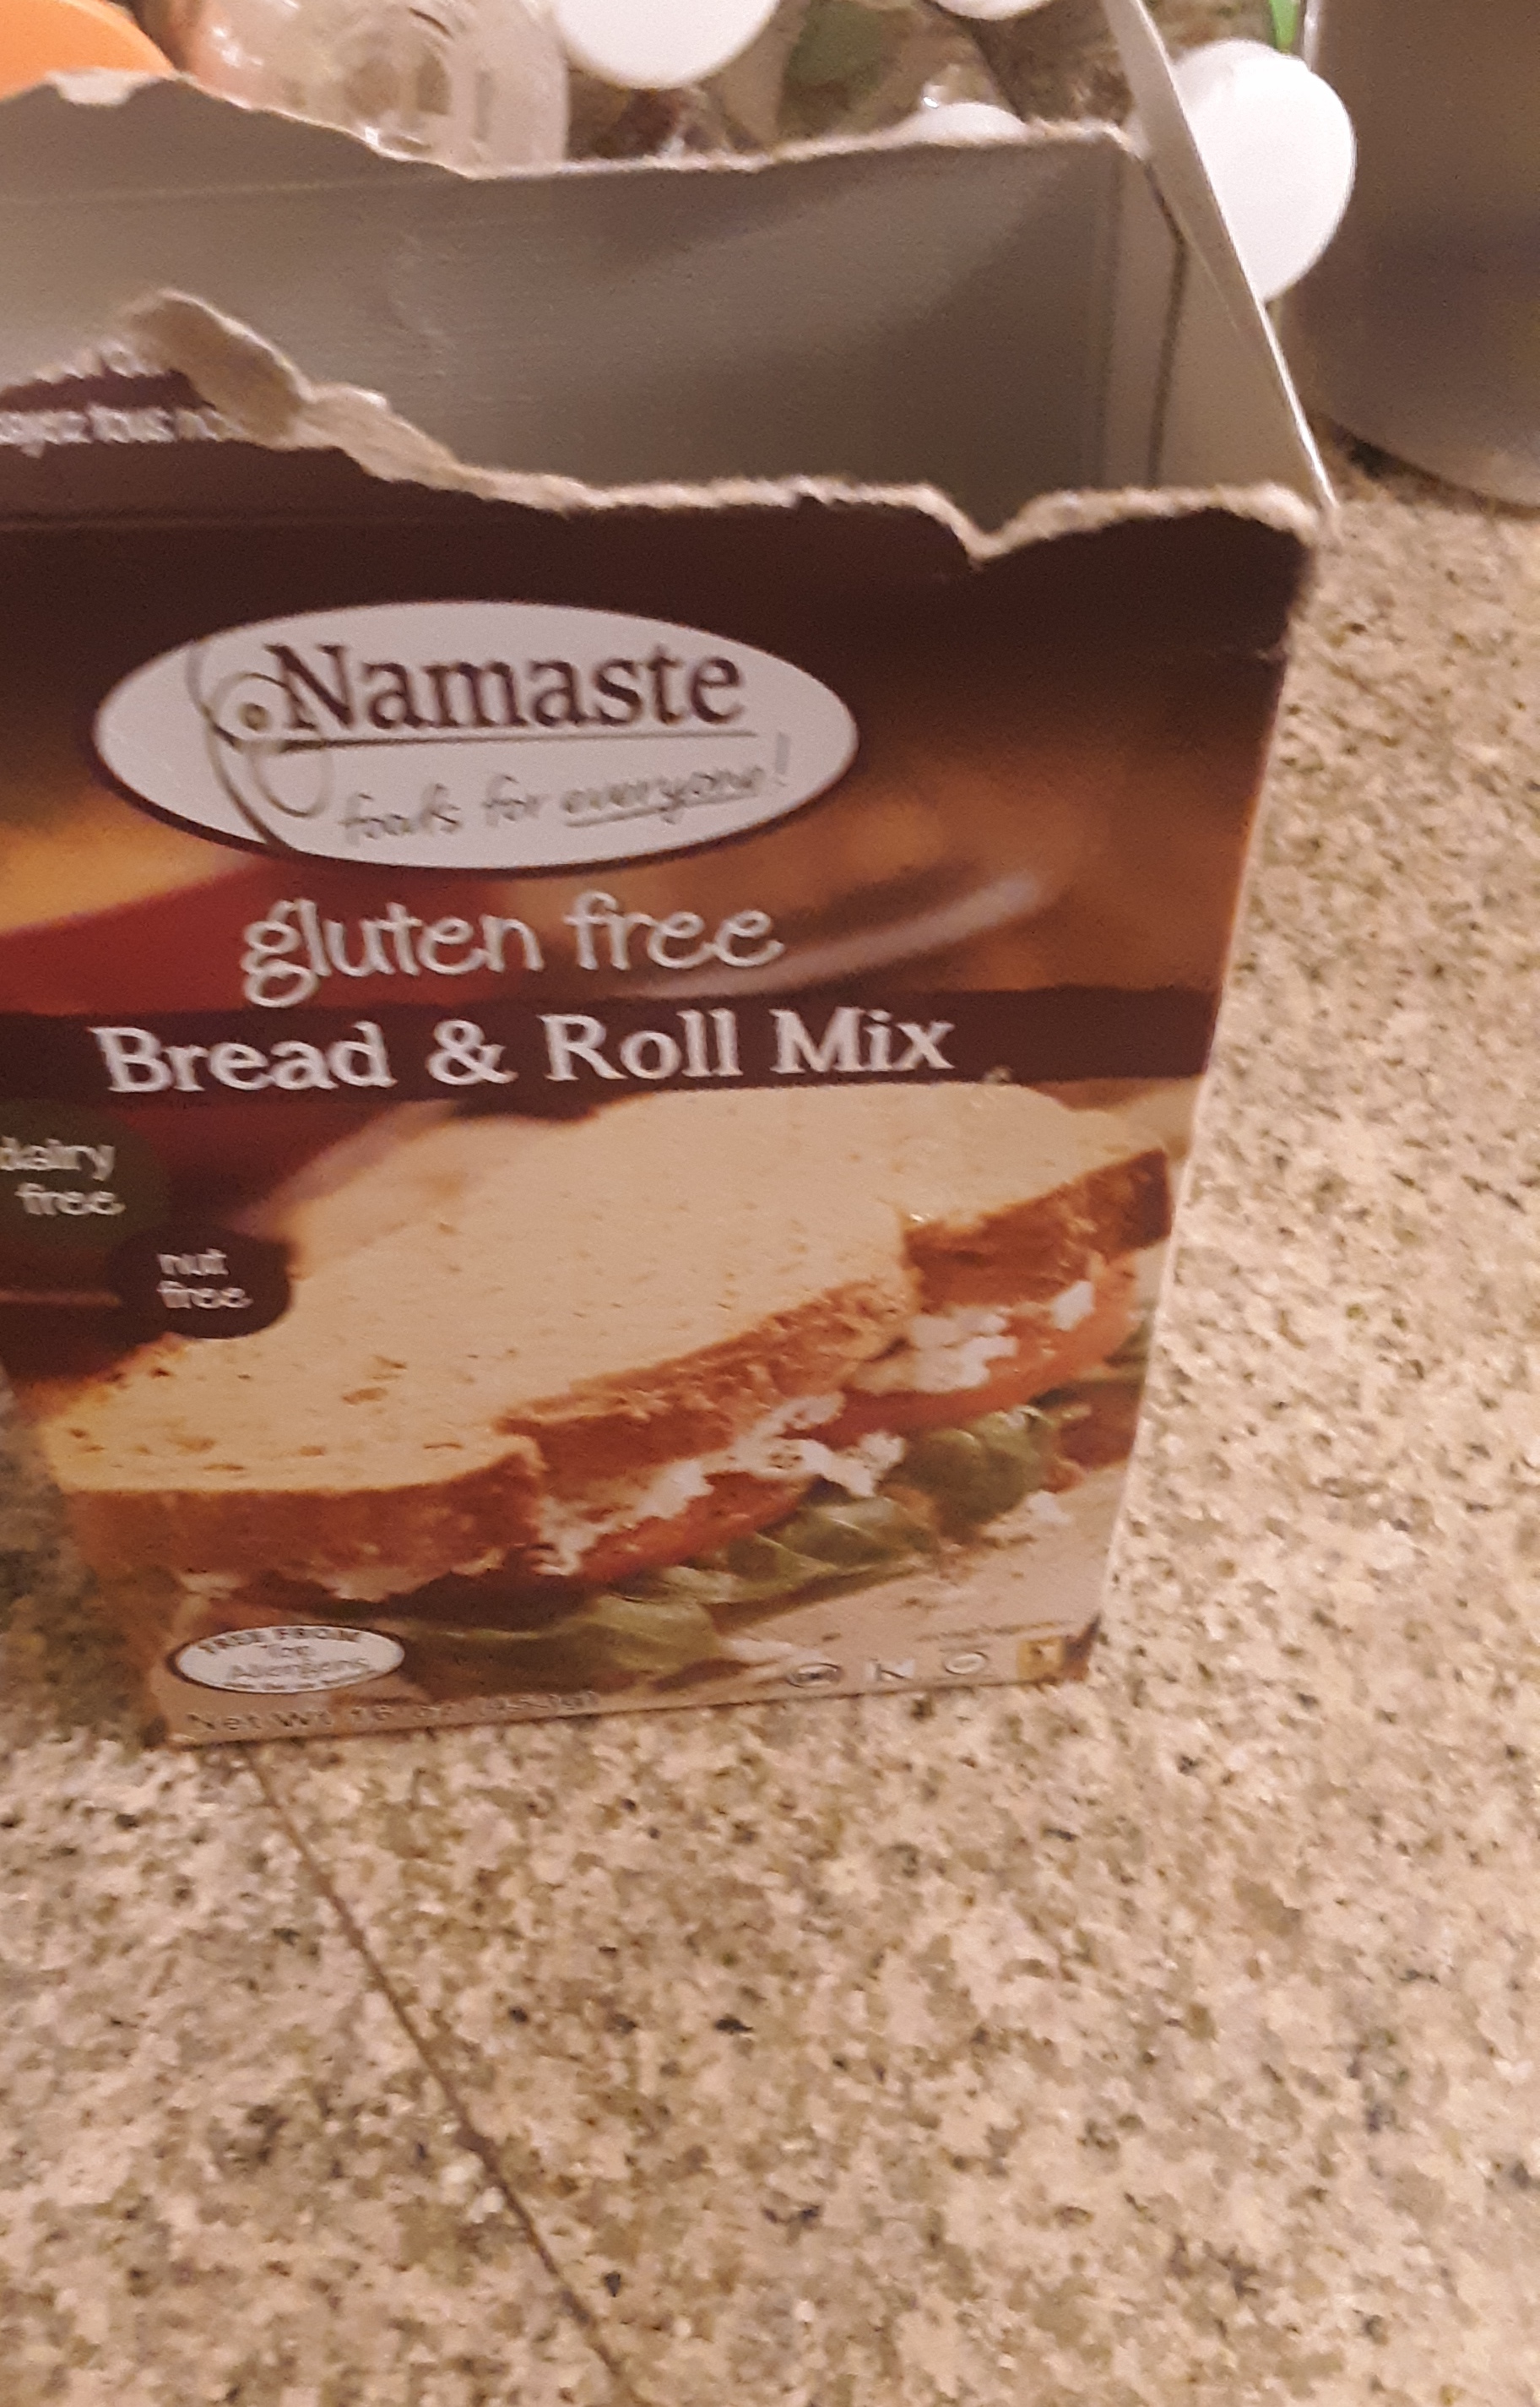 Living well in the 21st century - Limassol, Cyprus - a picture of the package says, "Namaste - foods for everyone! gluten free - bread and roll mix" dairy free and nut free written on the front package with a picture of a sandwich with lettuce, tomato, and mayo. 